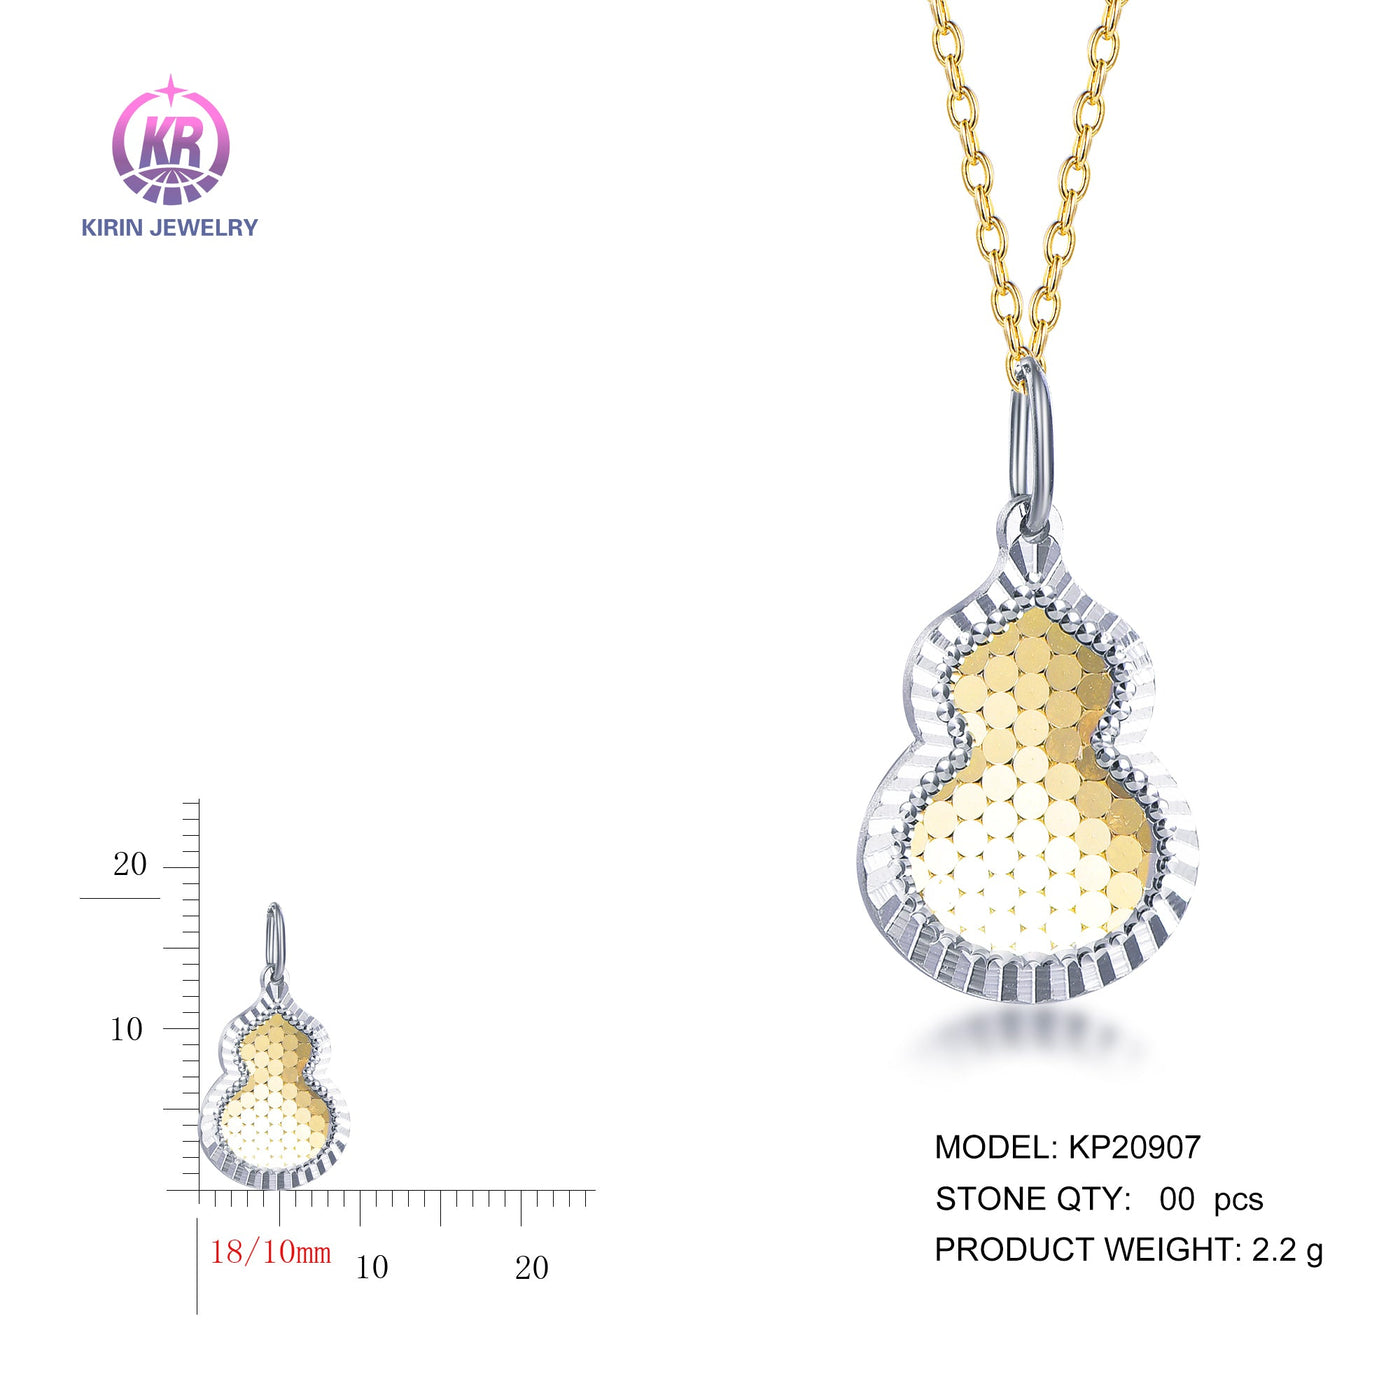 925 silver pendant with 2-tone plating rhodium and 14K gold KP20907 Kirin Jewelry